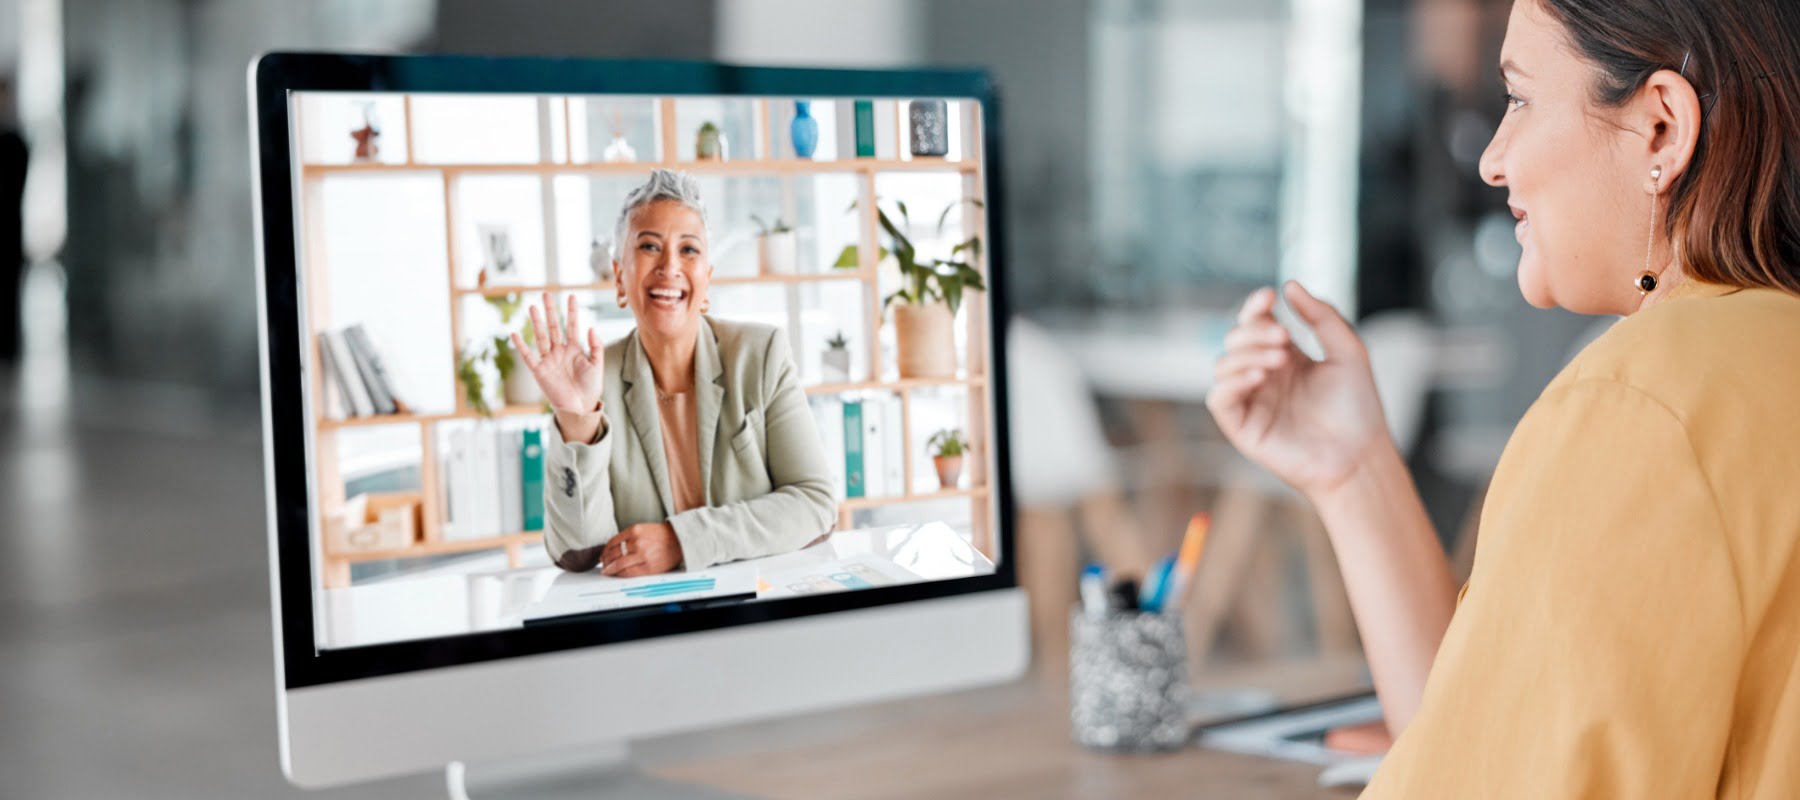 Woman remote executive assistant with short brown hair sitting at a desk looking at a computer monitor. She's talking to another woman via a video call. Both are looking engaged and productive.